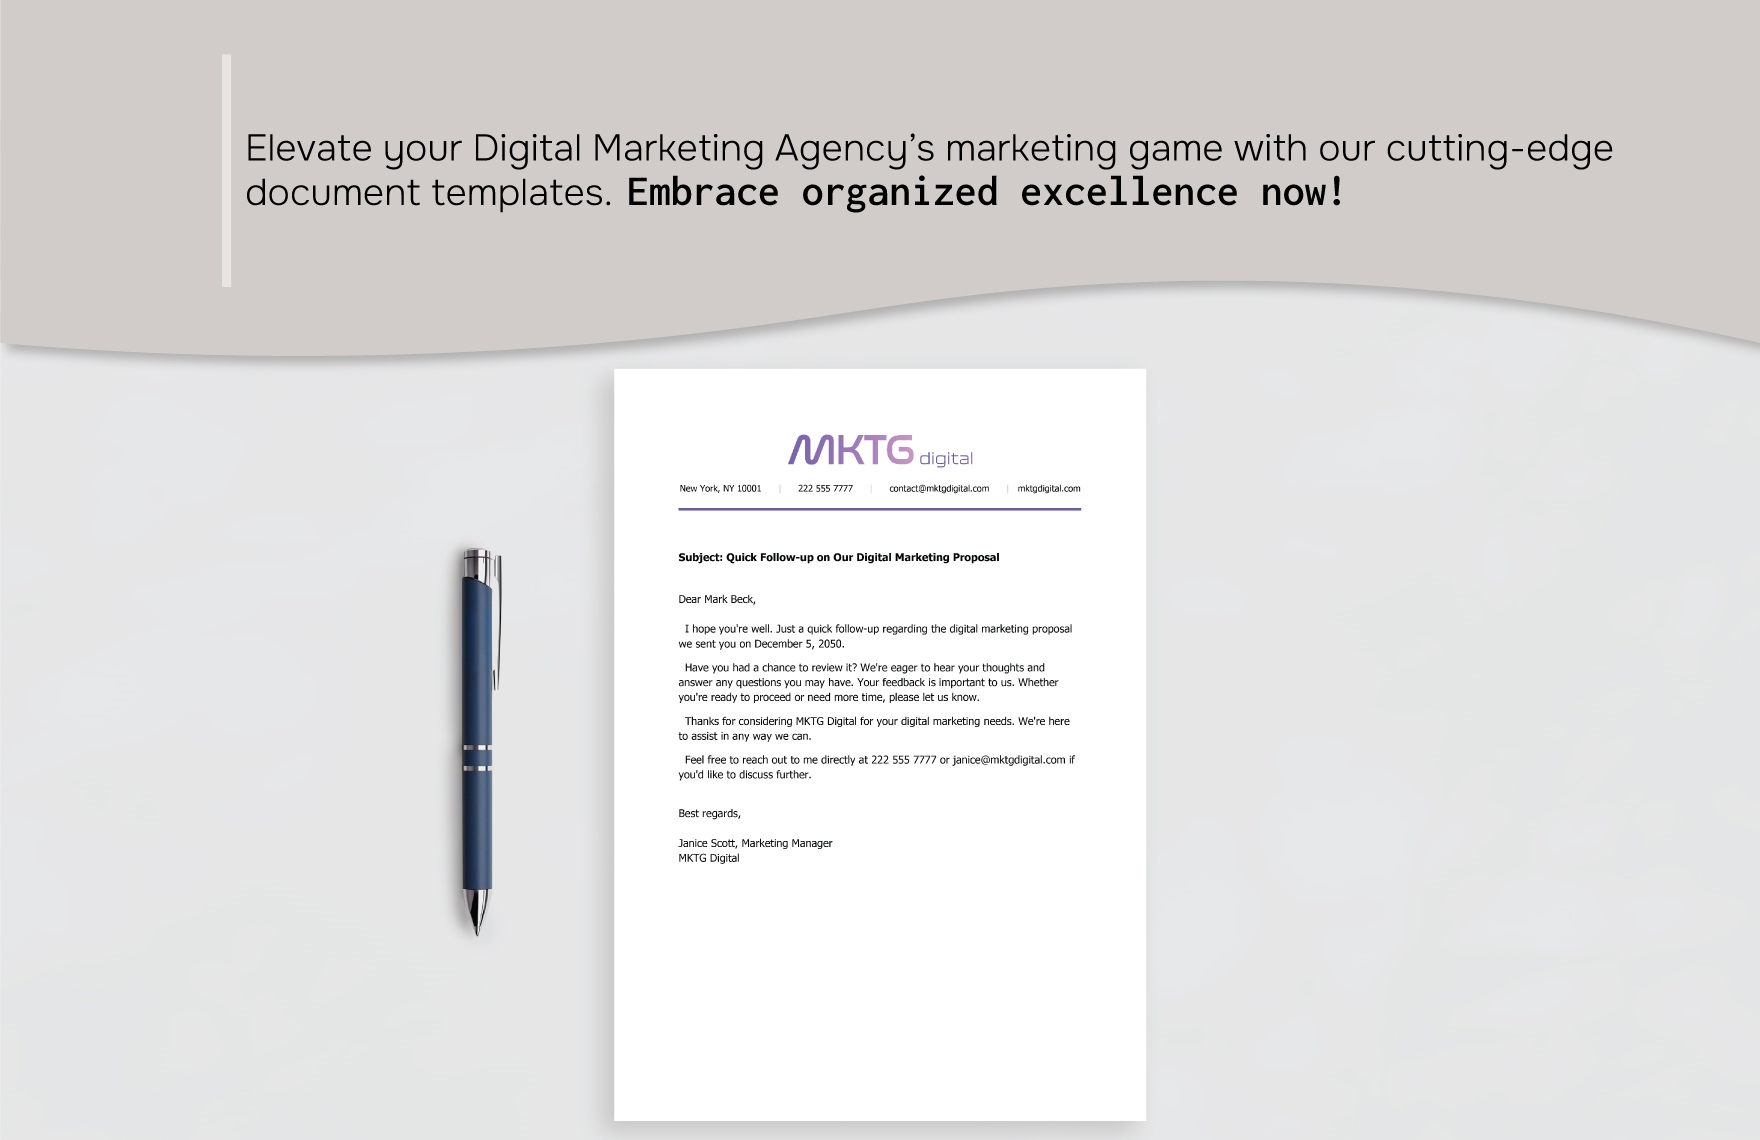 Digital Marketing Agency Proposal Follow-up Email Template